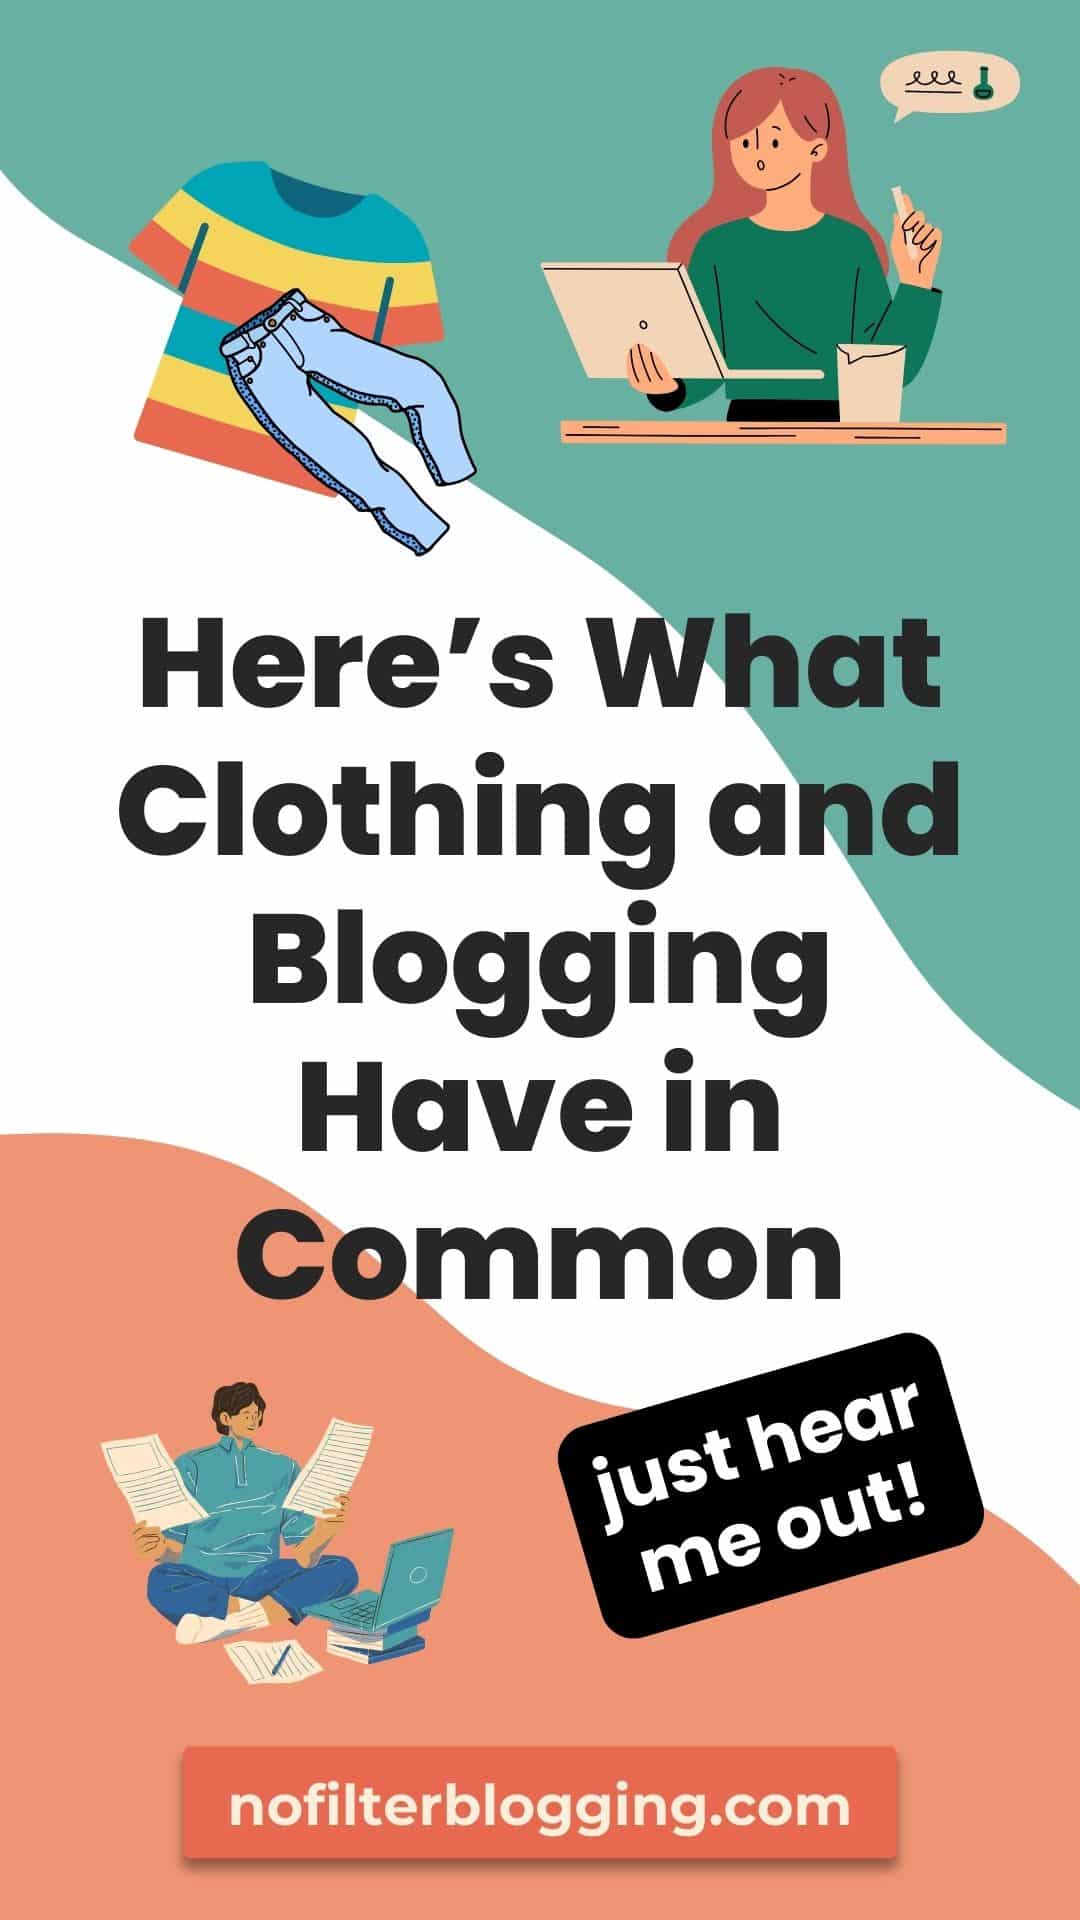 Here's What Clothing and Blogging Have in Common